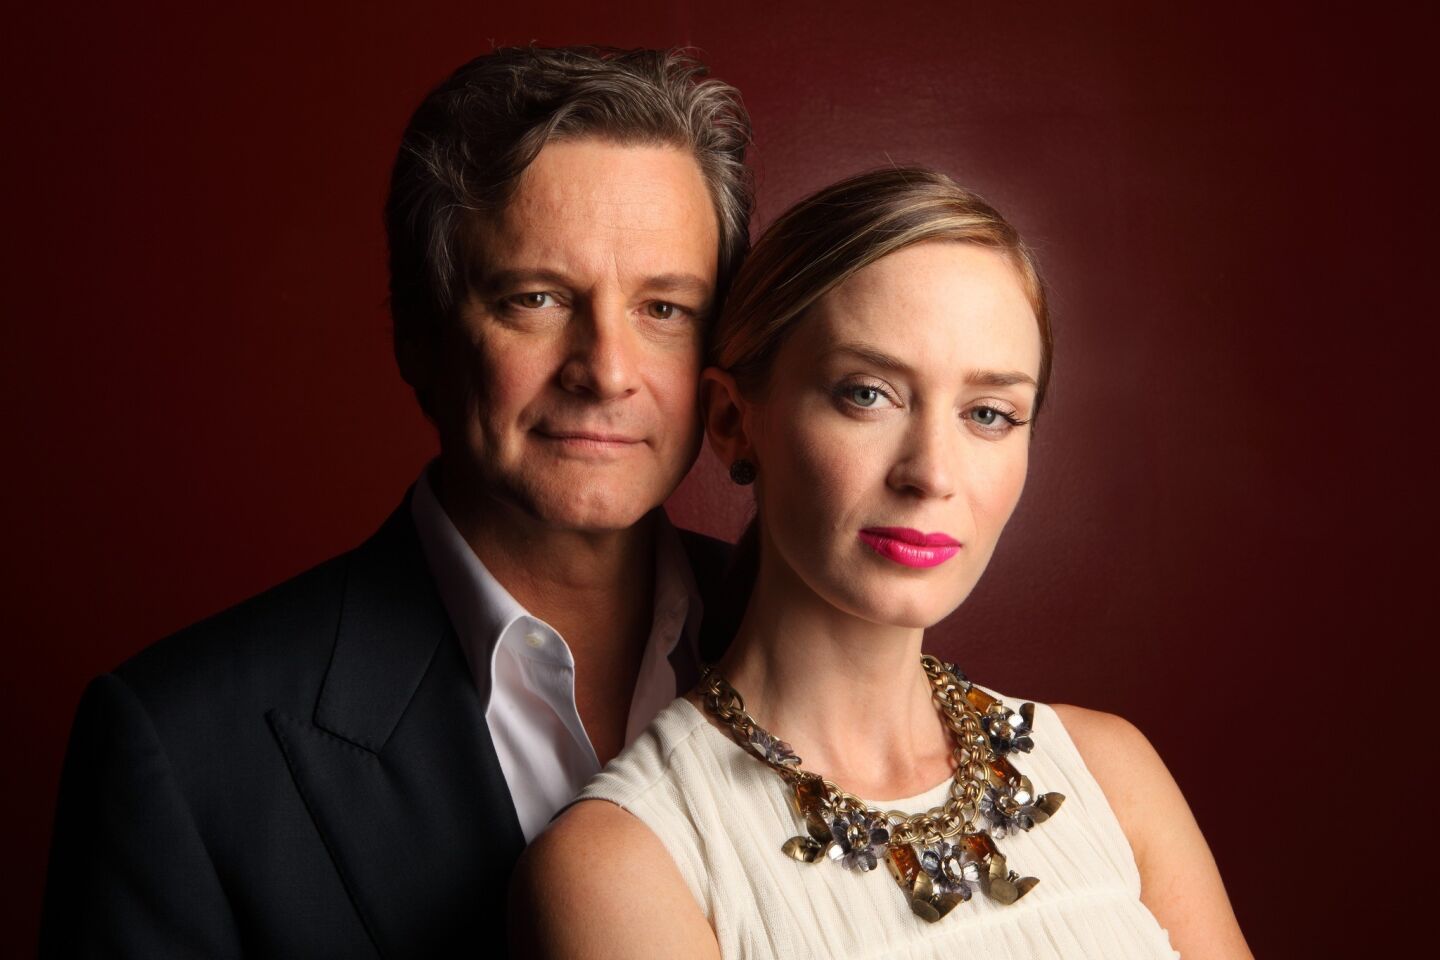 Colin Firth and Emily Blunt star in the new drama "Arthur Newman," which debuted at the Toronto Film Festival.